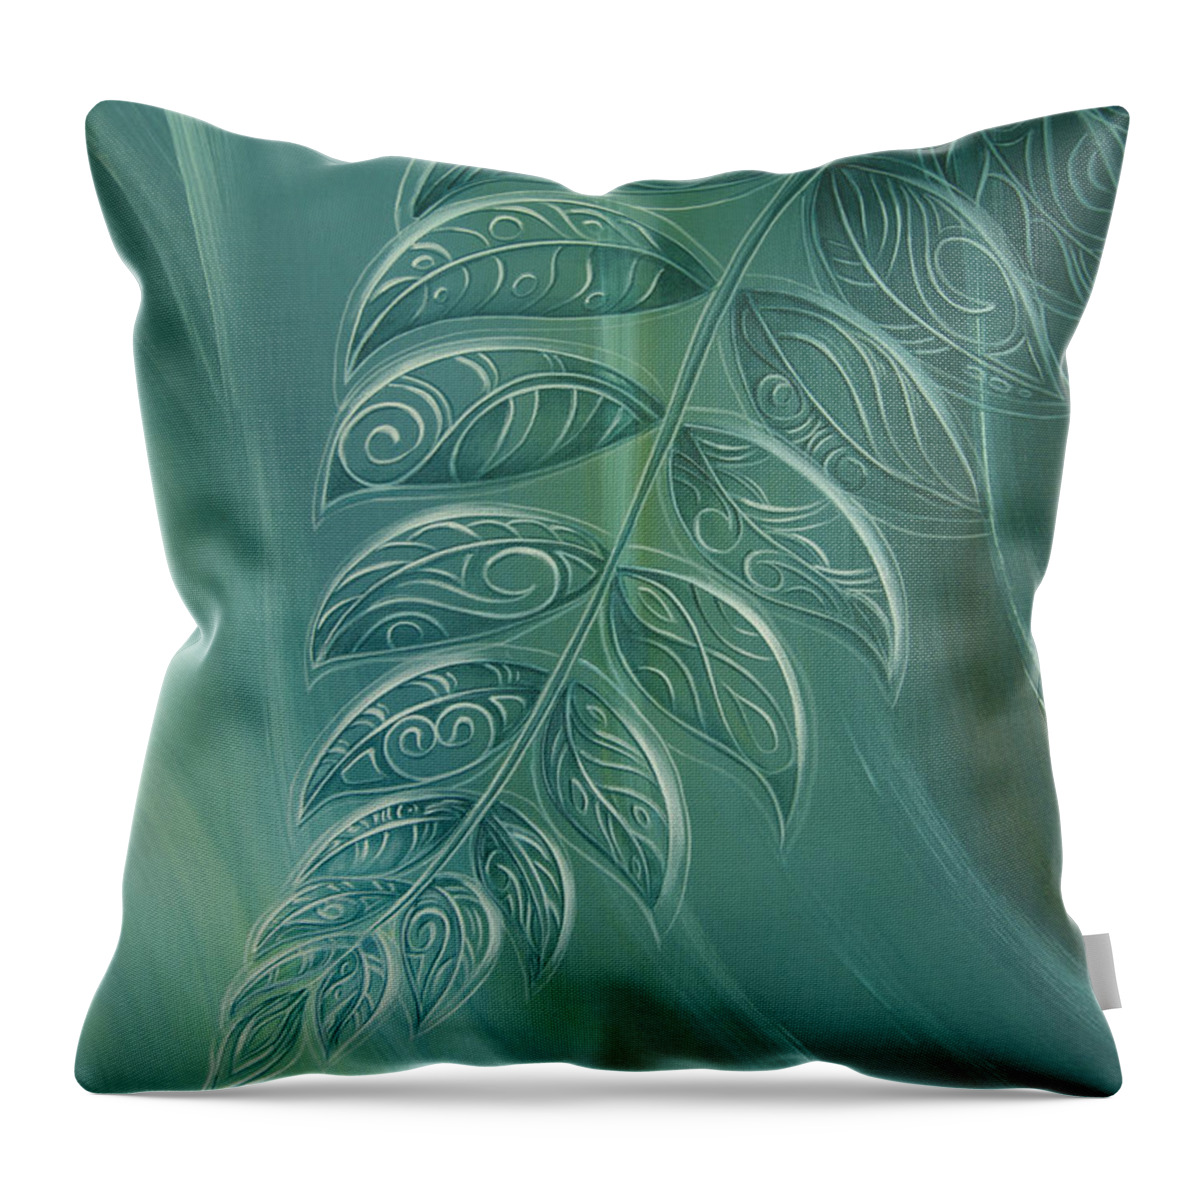 Silverfern Throw Pillow featuring the painting Silver Fern by Reina Cottier by Reina Cottier